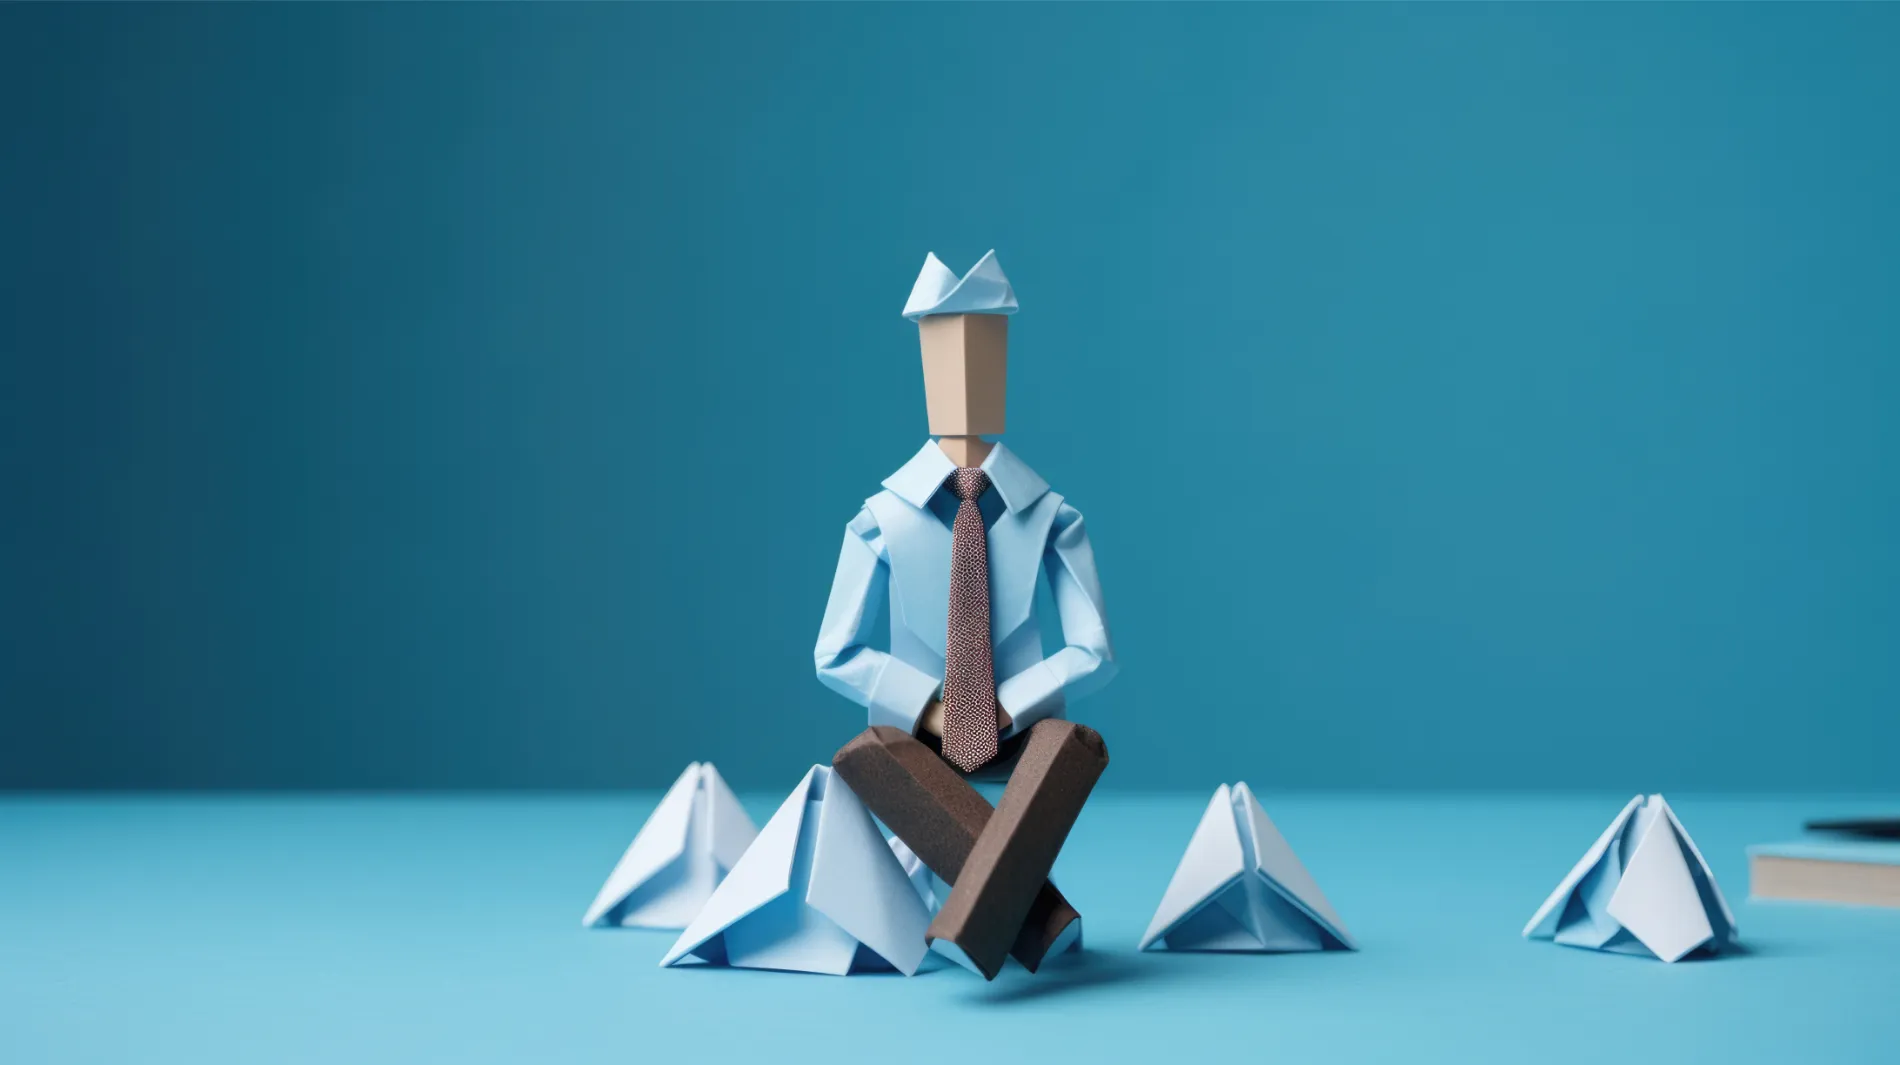 Concept of person with ideas as folded paper